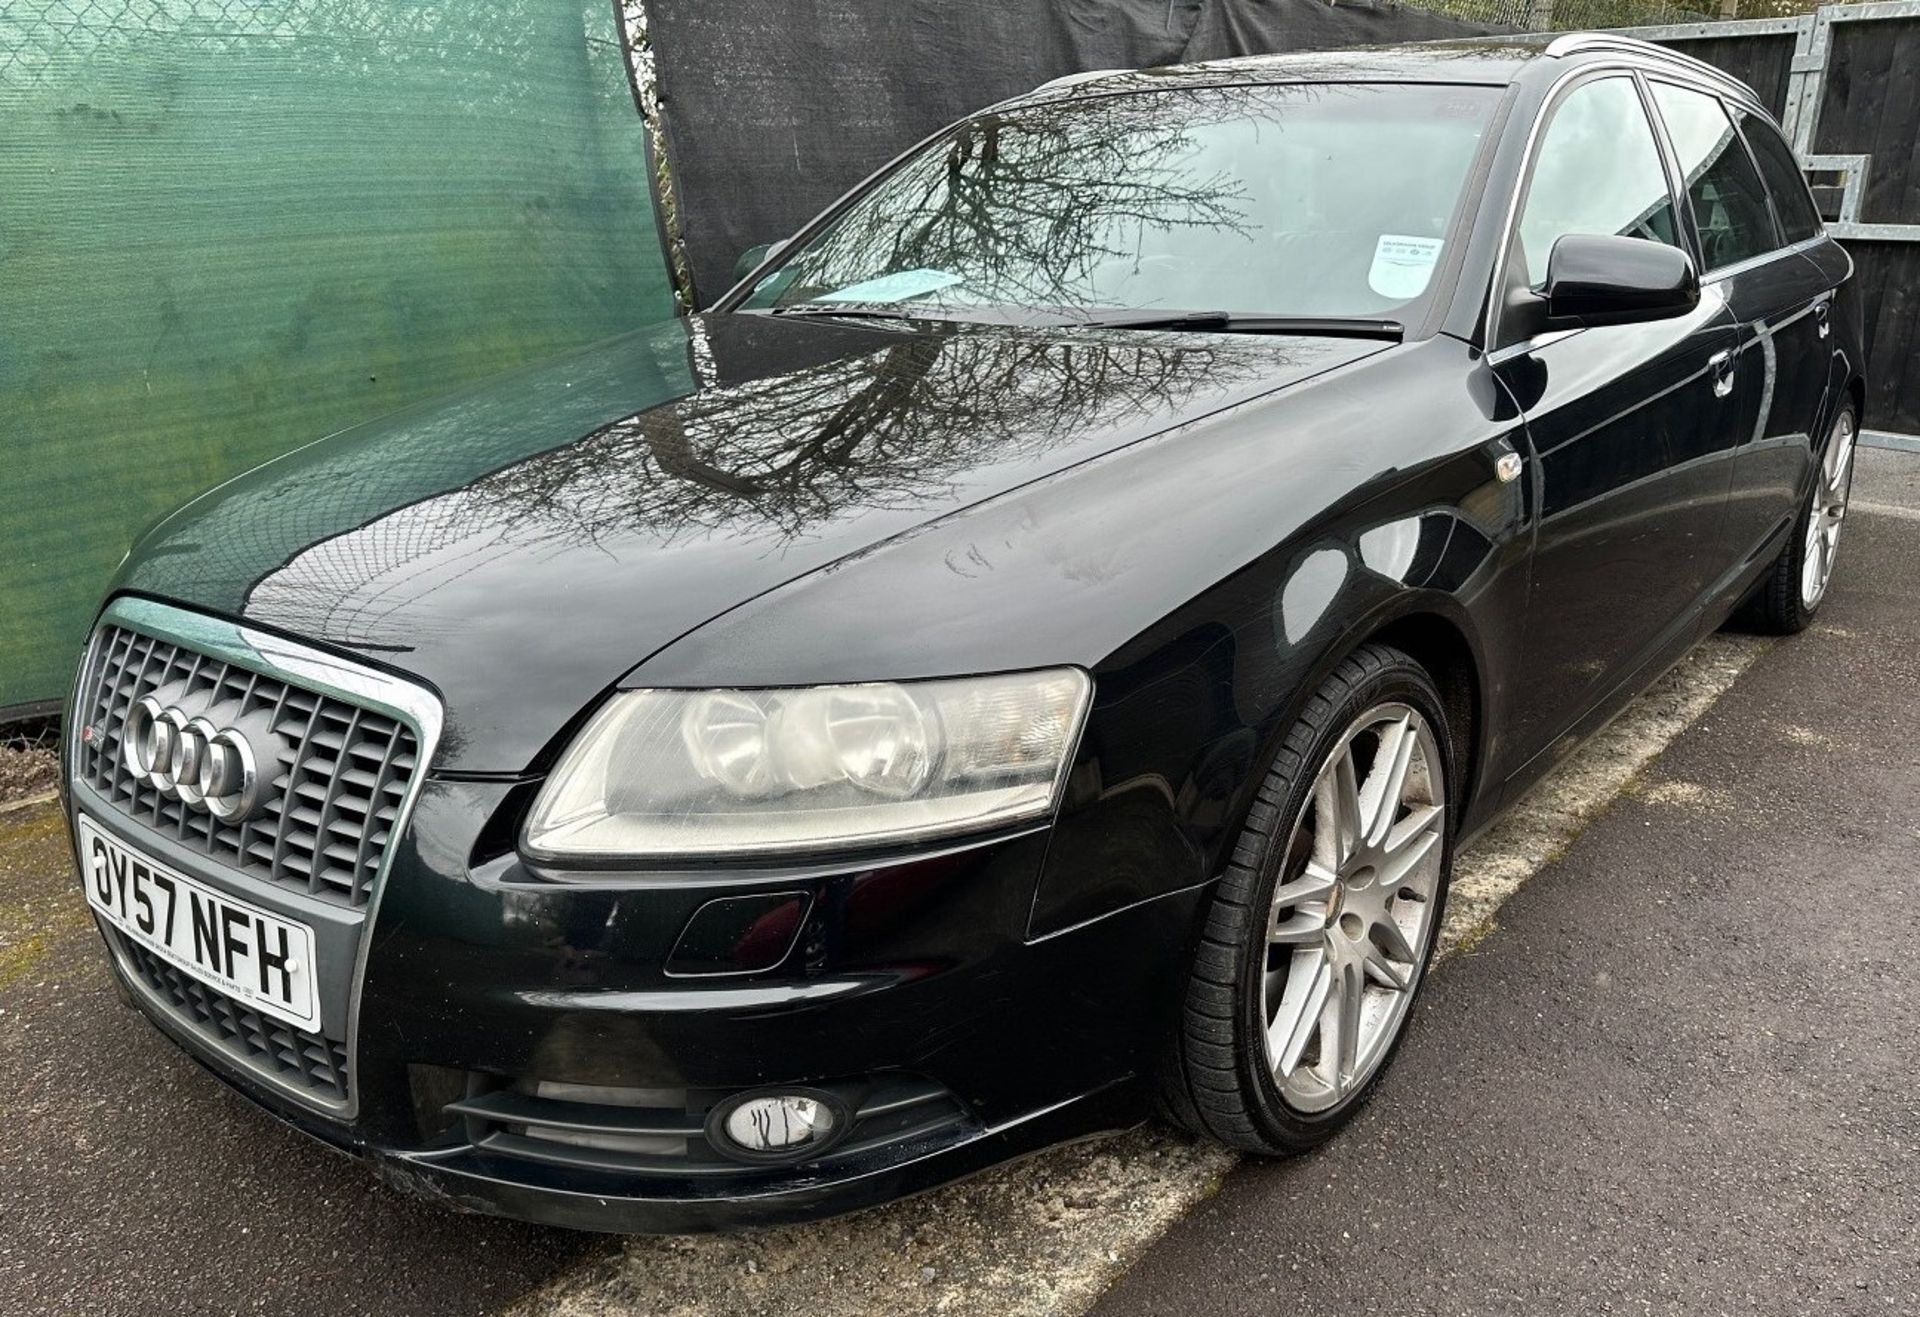 2007 Audi A6 Avant 2.7 TDi Registration number OY57 NFH Chassis number WAUZZZ4F58N016755 Engine - Image 2 of 17